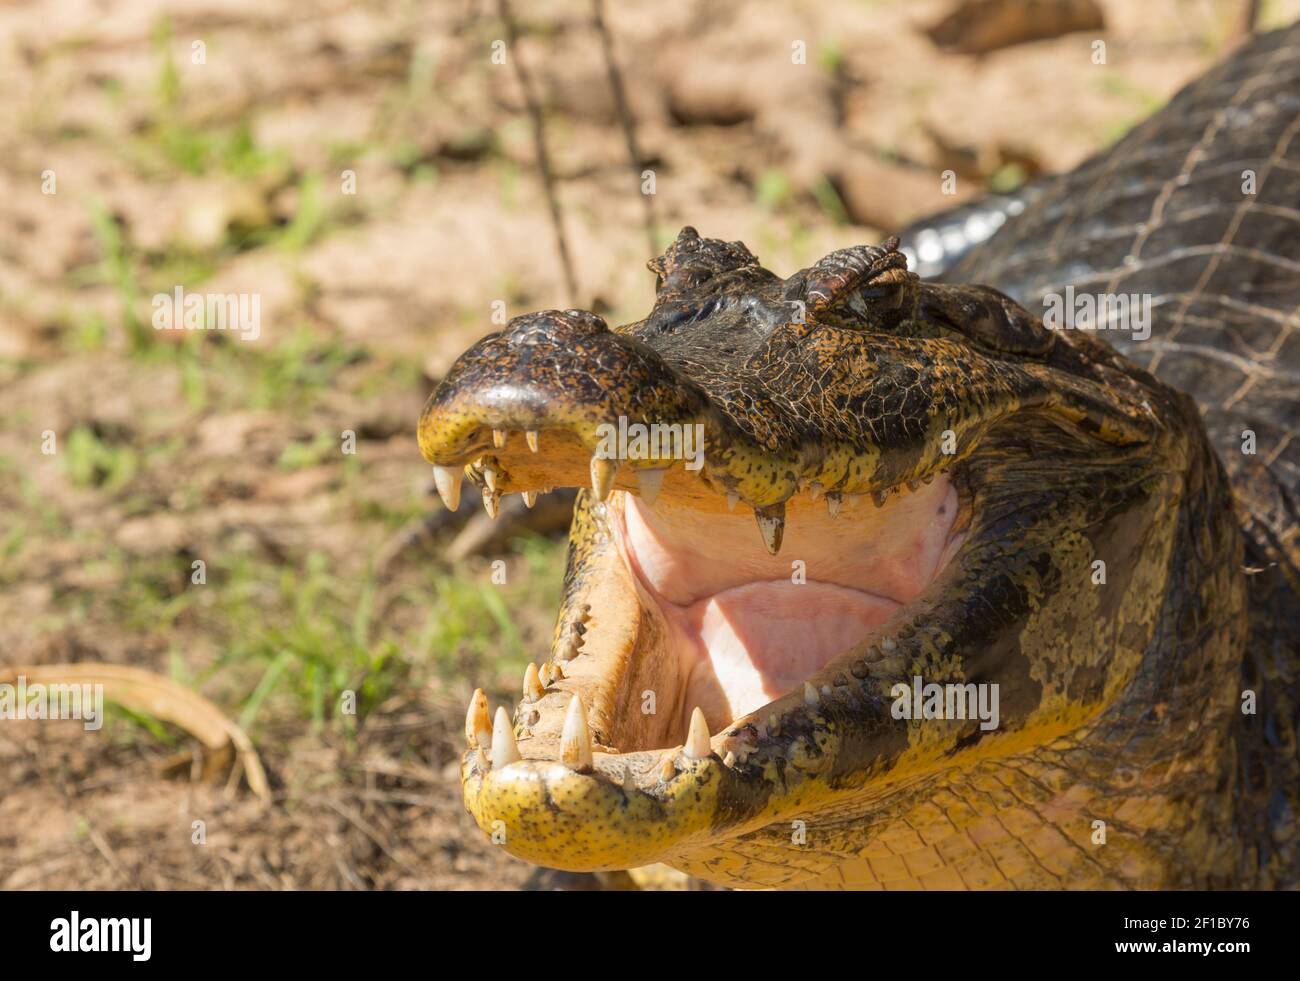 Dangerous animals: Close up of the head of a Caiman with opened mouth and visible teeth Stock Photo